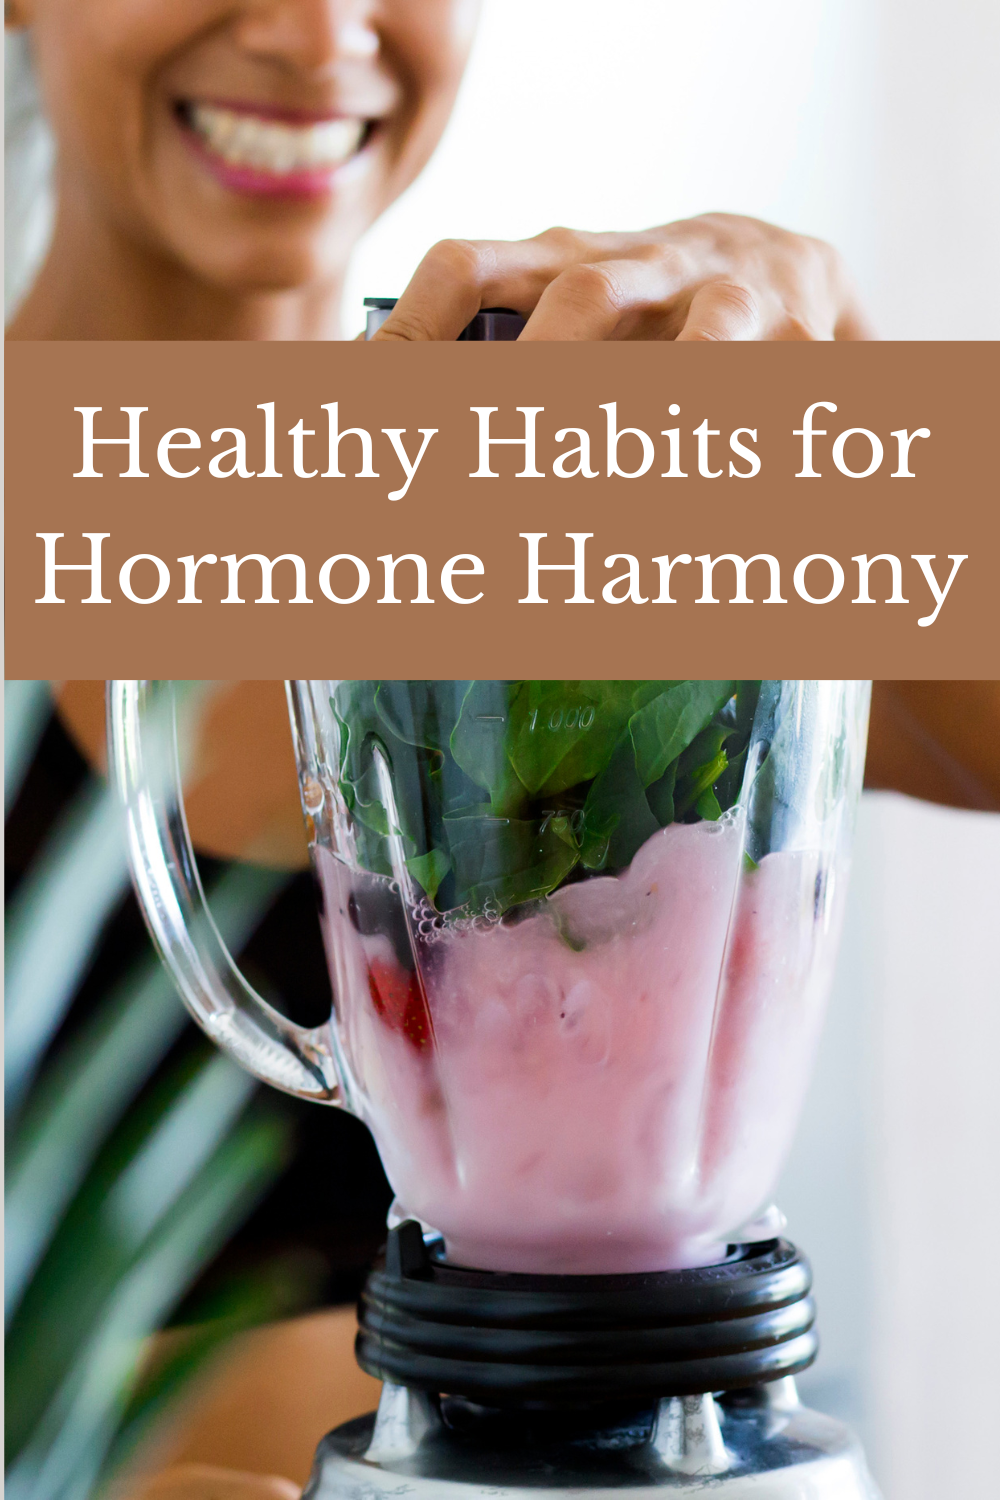 Start These Healthy Habits for Hormone Harmony